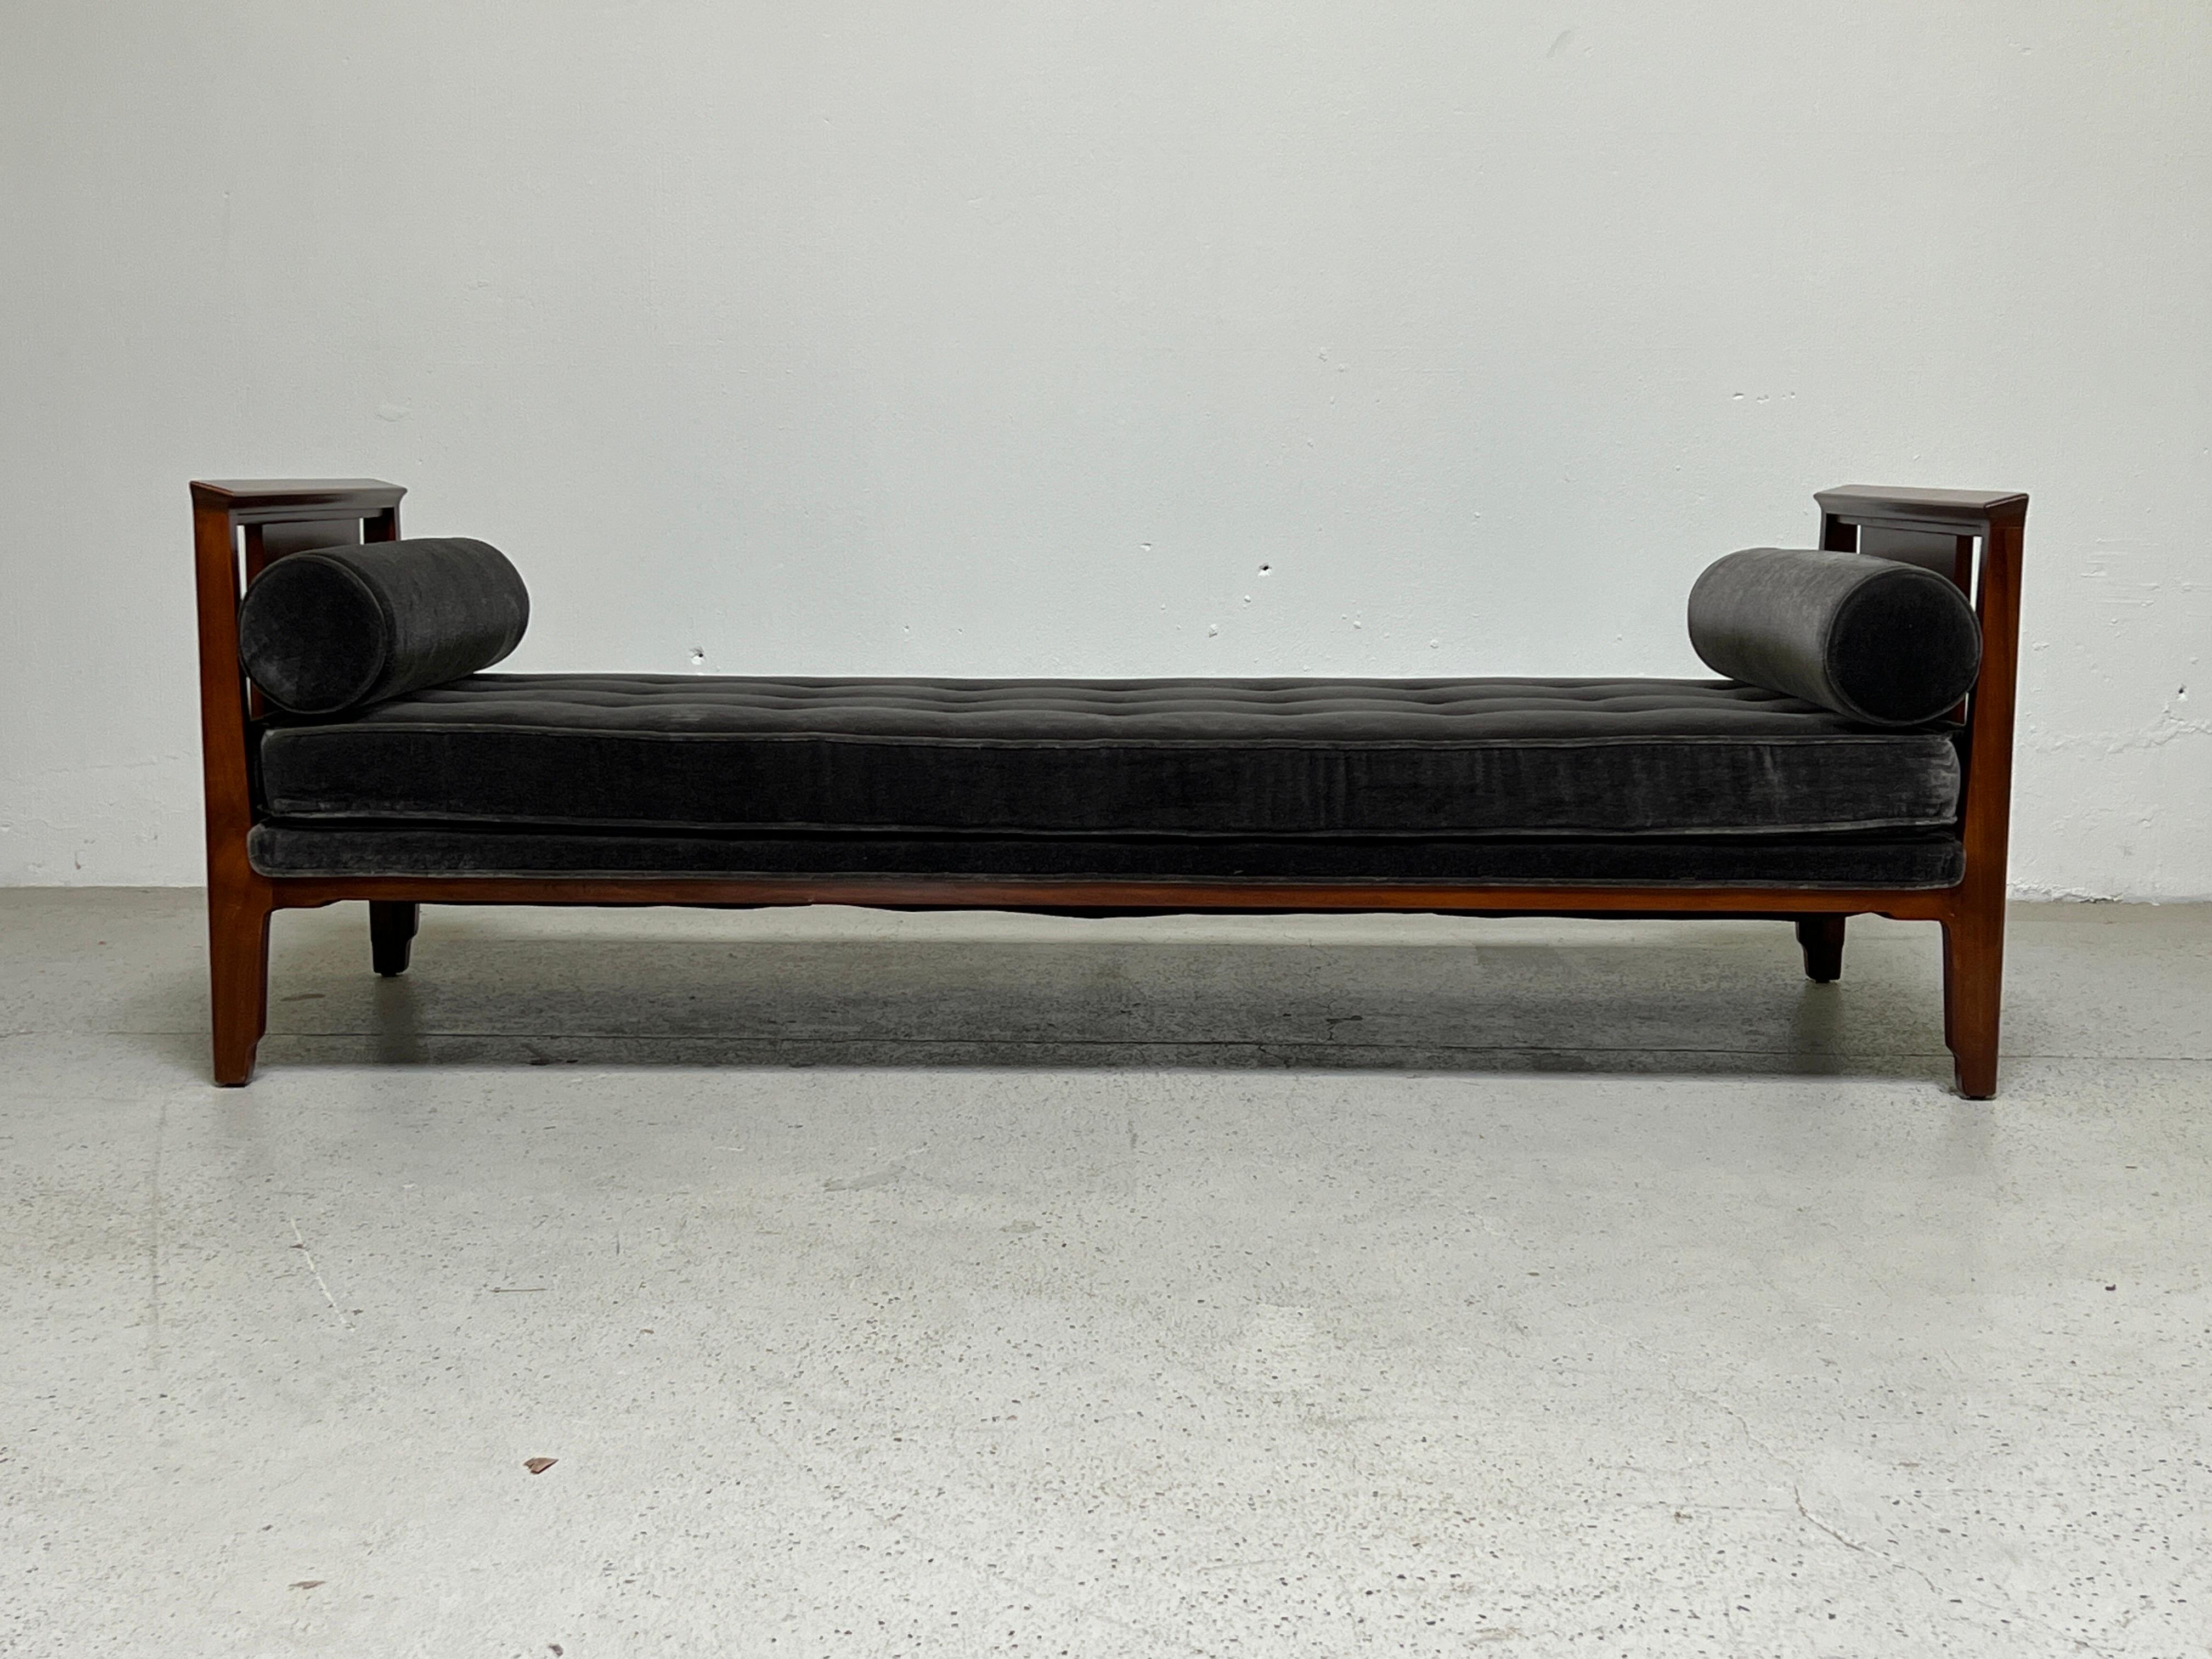 A rare daybed in mahogany and mohair designed by Edward Wormley for Dunbar.